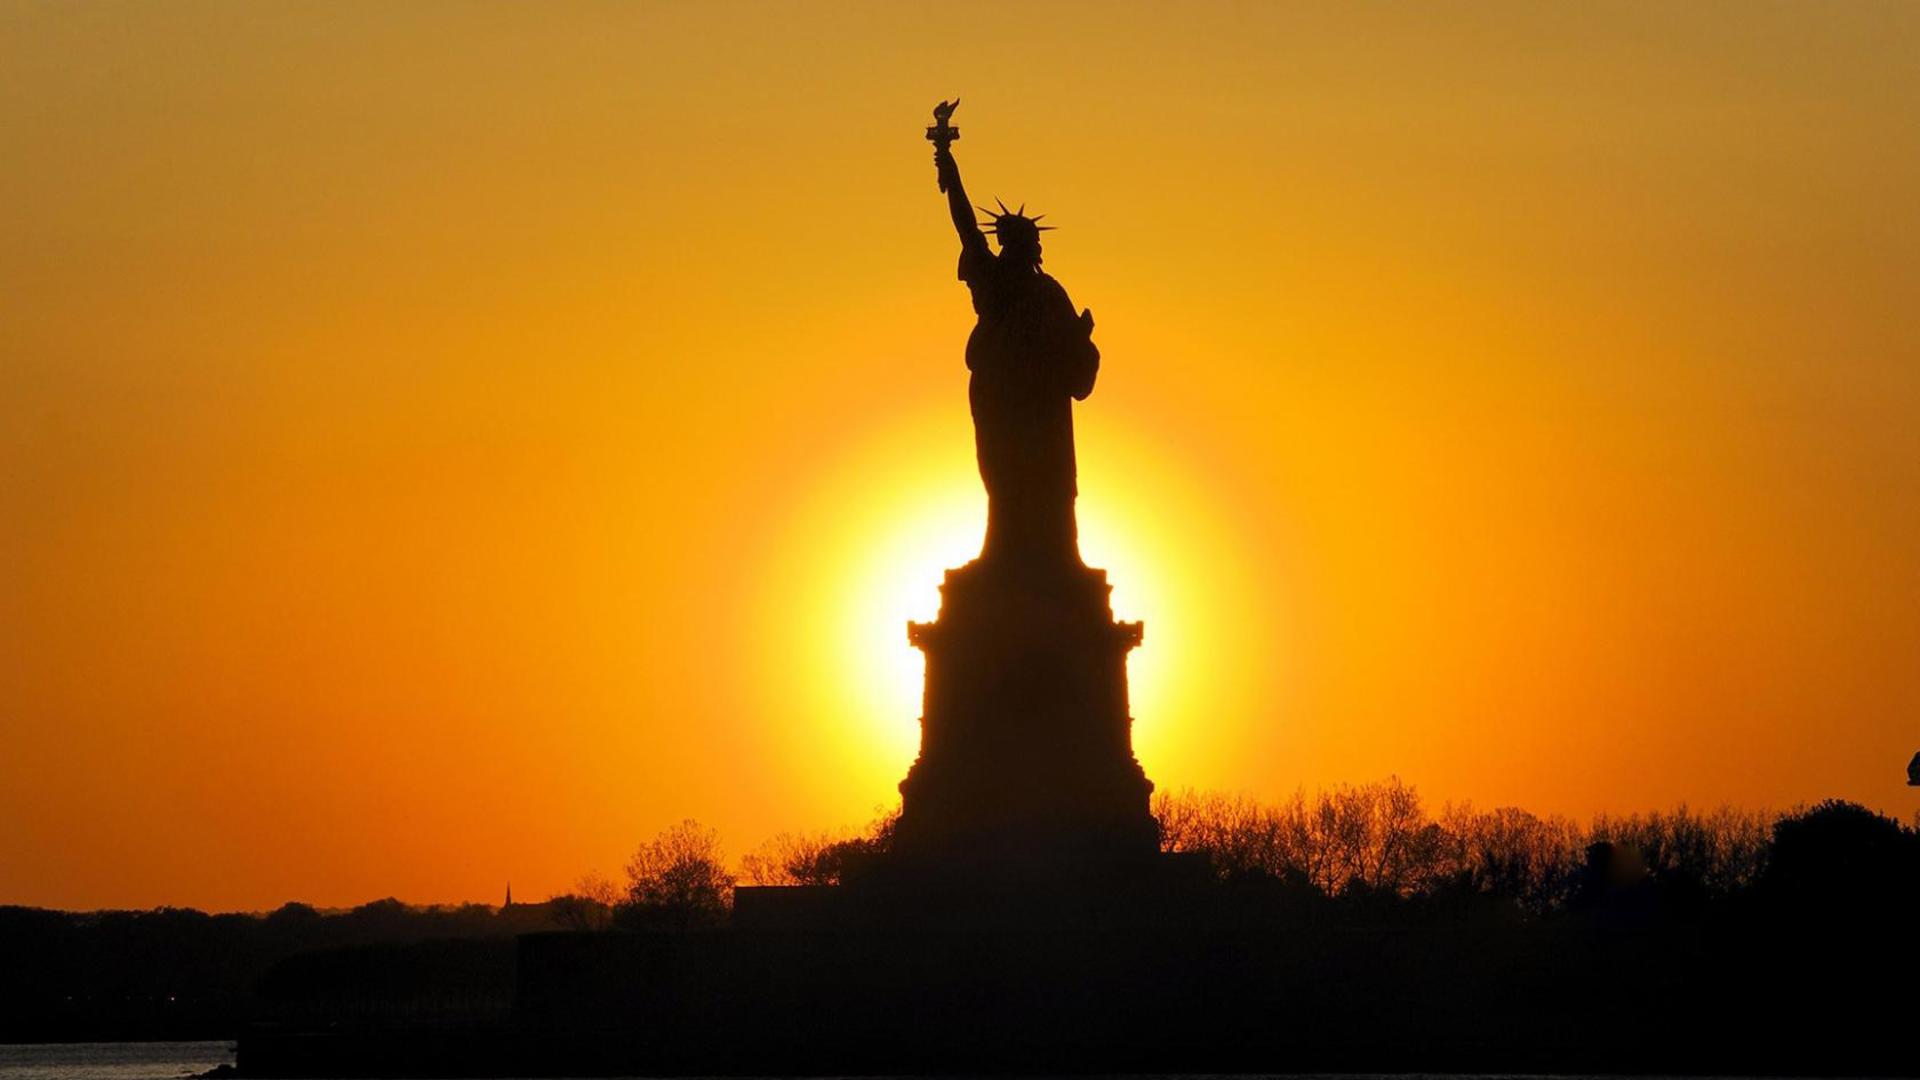 Silhouette Of The Statue Of Liberty In Sunset Hd Desktop 